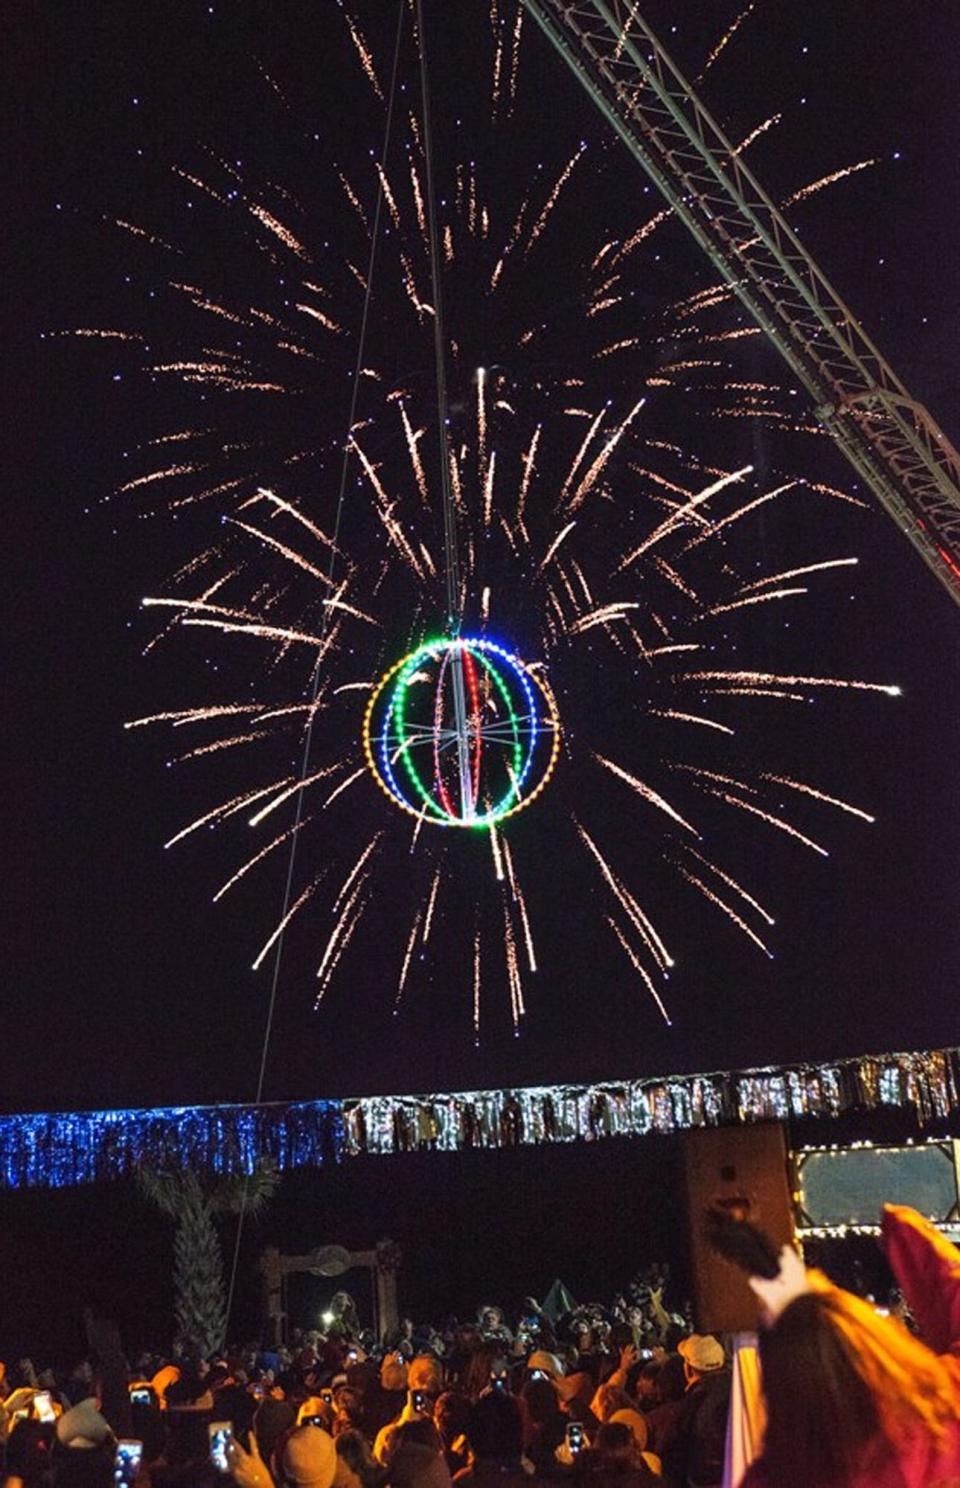 The Island of Lights New Year's Eve Celebration will be held Dec. 31 at Ocean Front Park, Kure Beach, features a giant beach ball being dropped at midnight followed by a fireworks display.